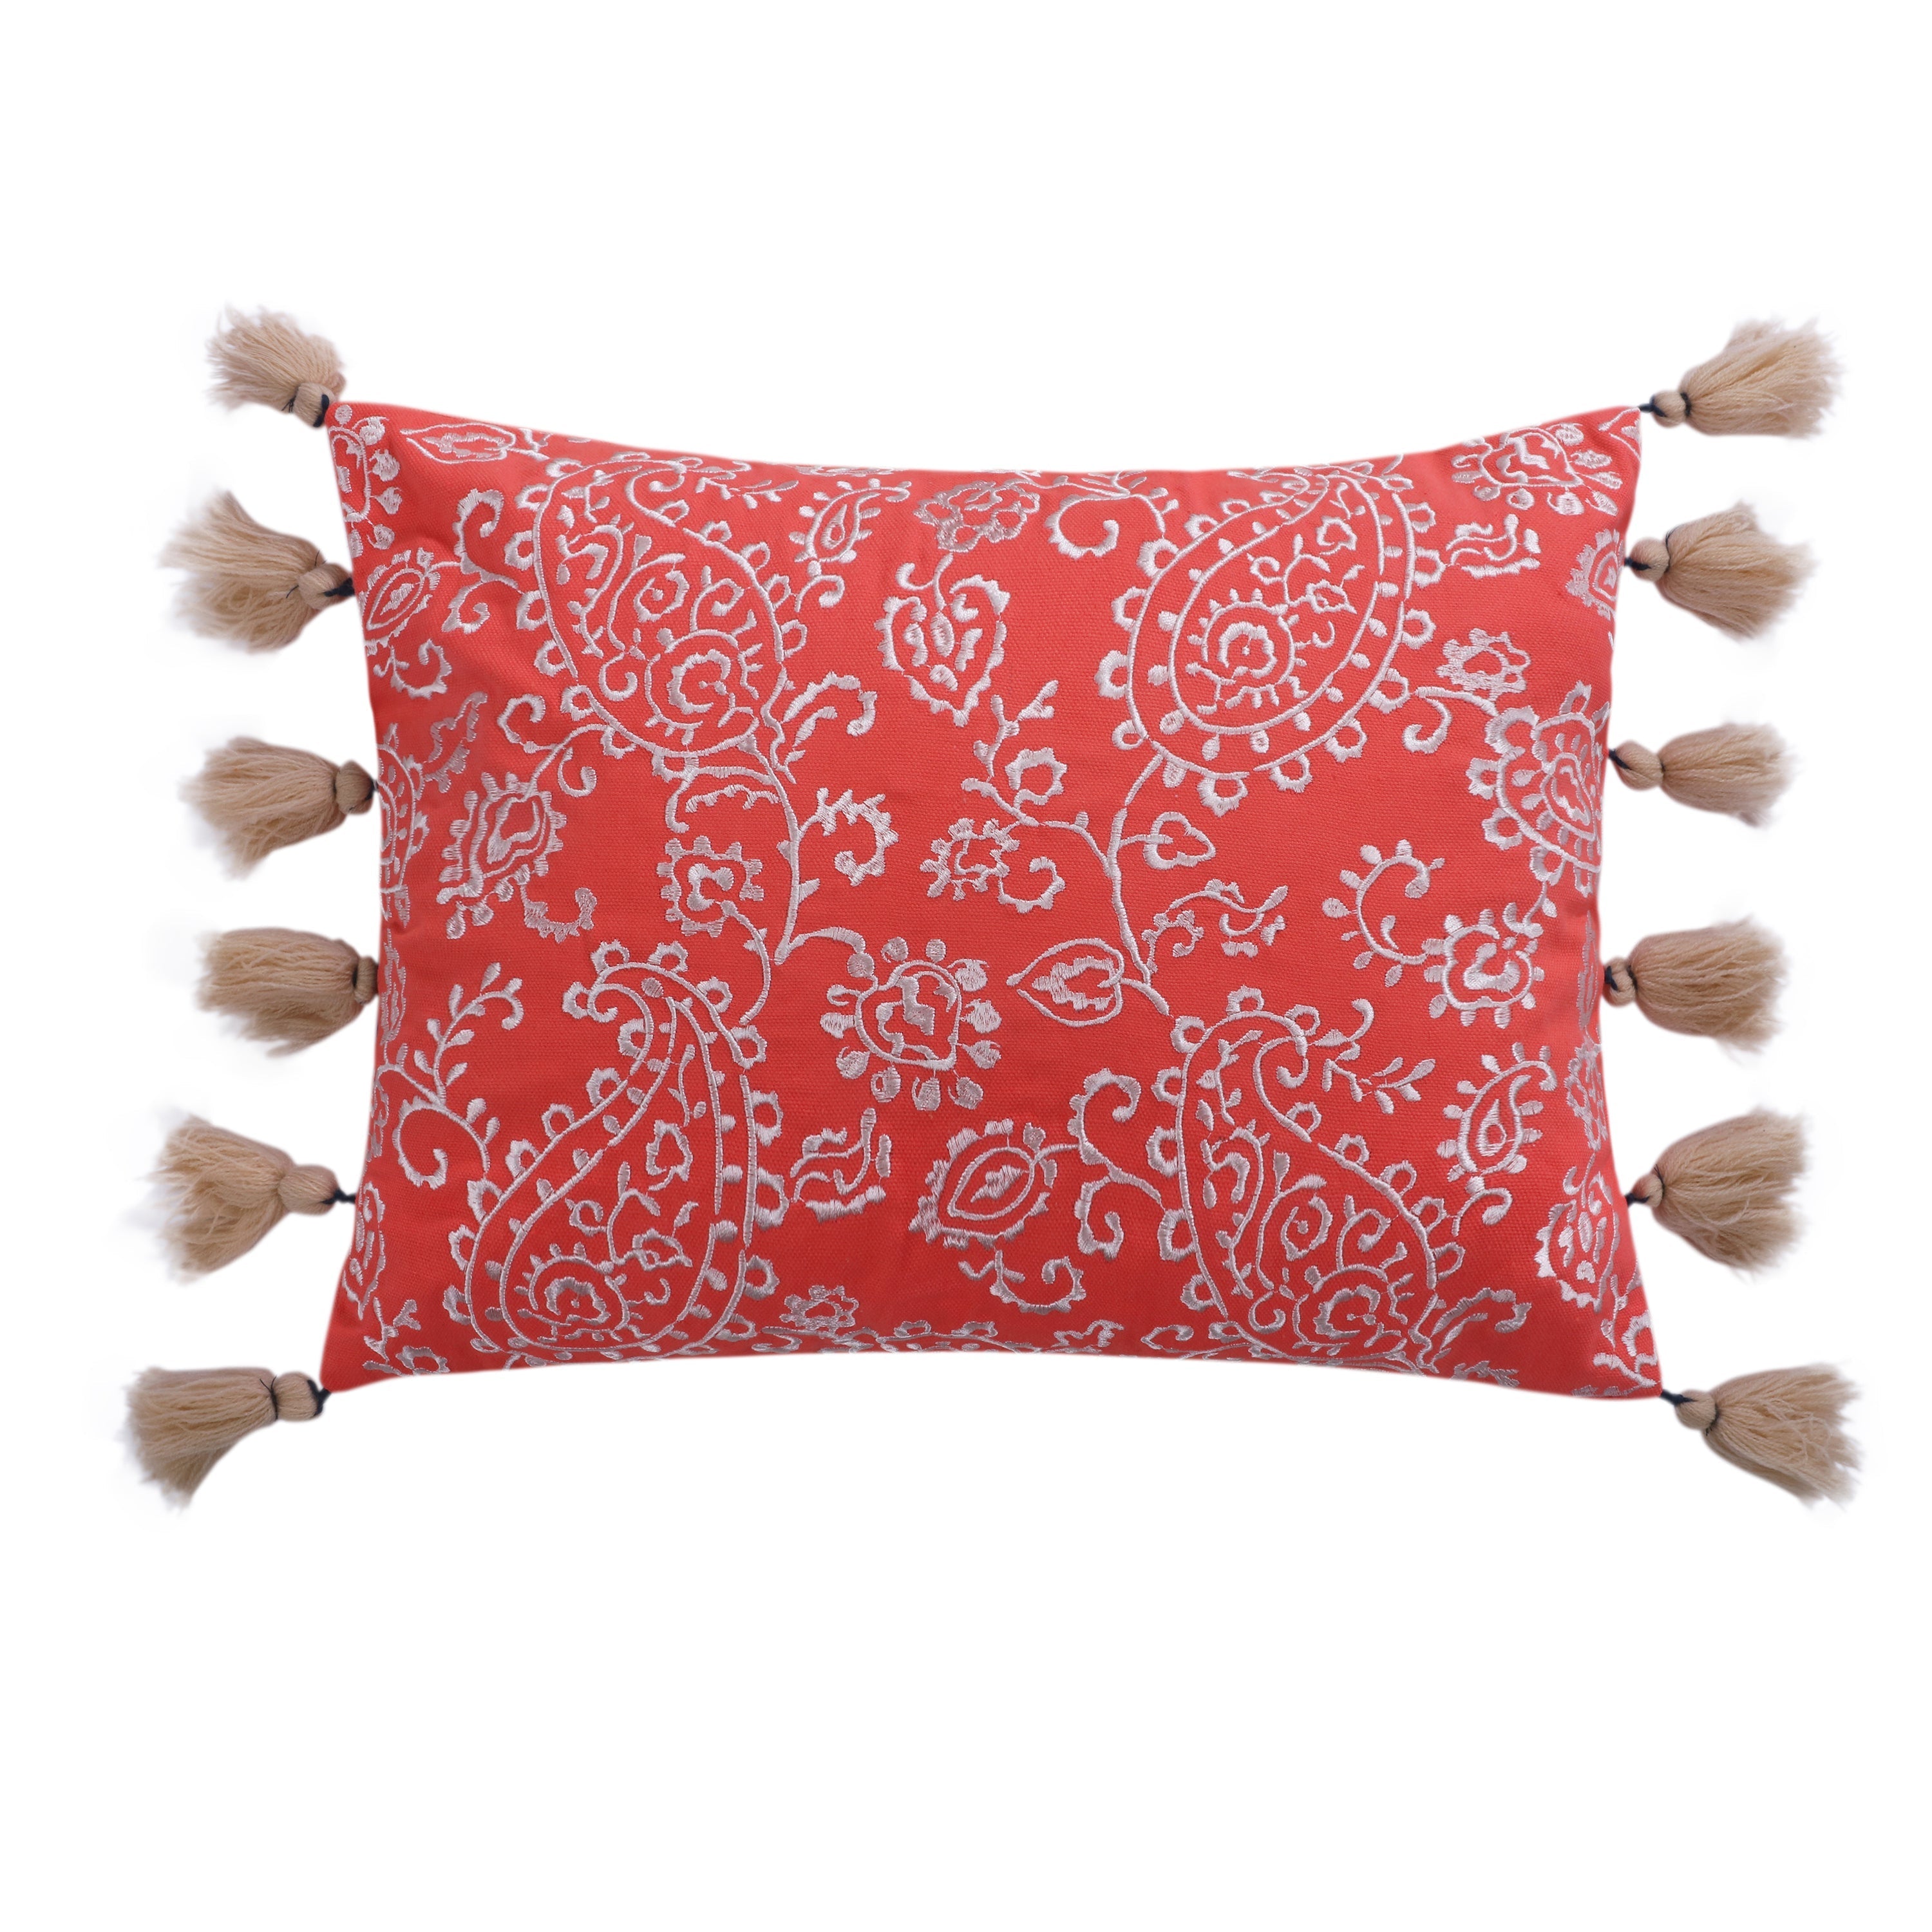 Caperoad Embroidered Pillow with Tassels